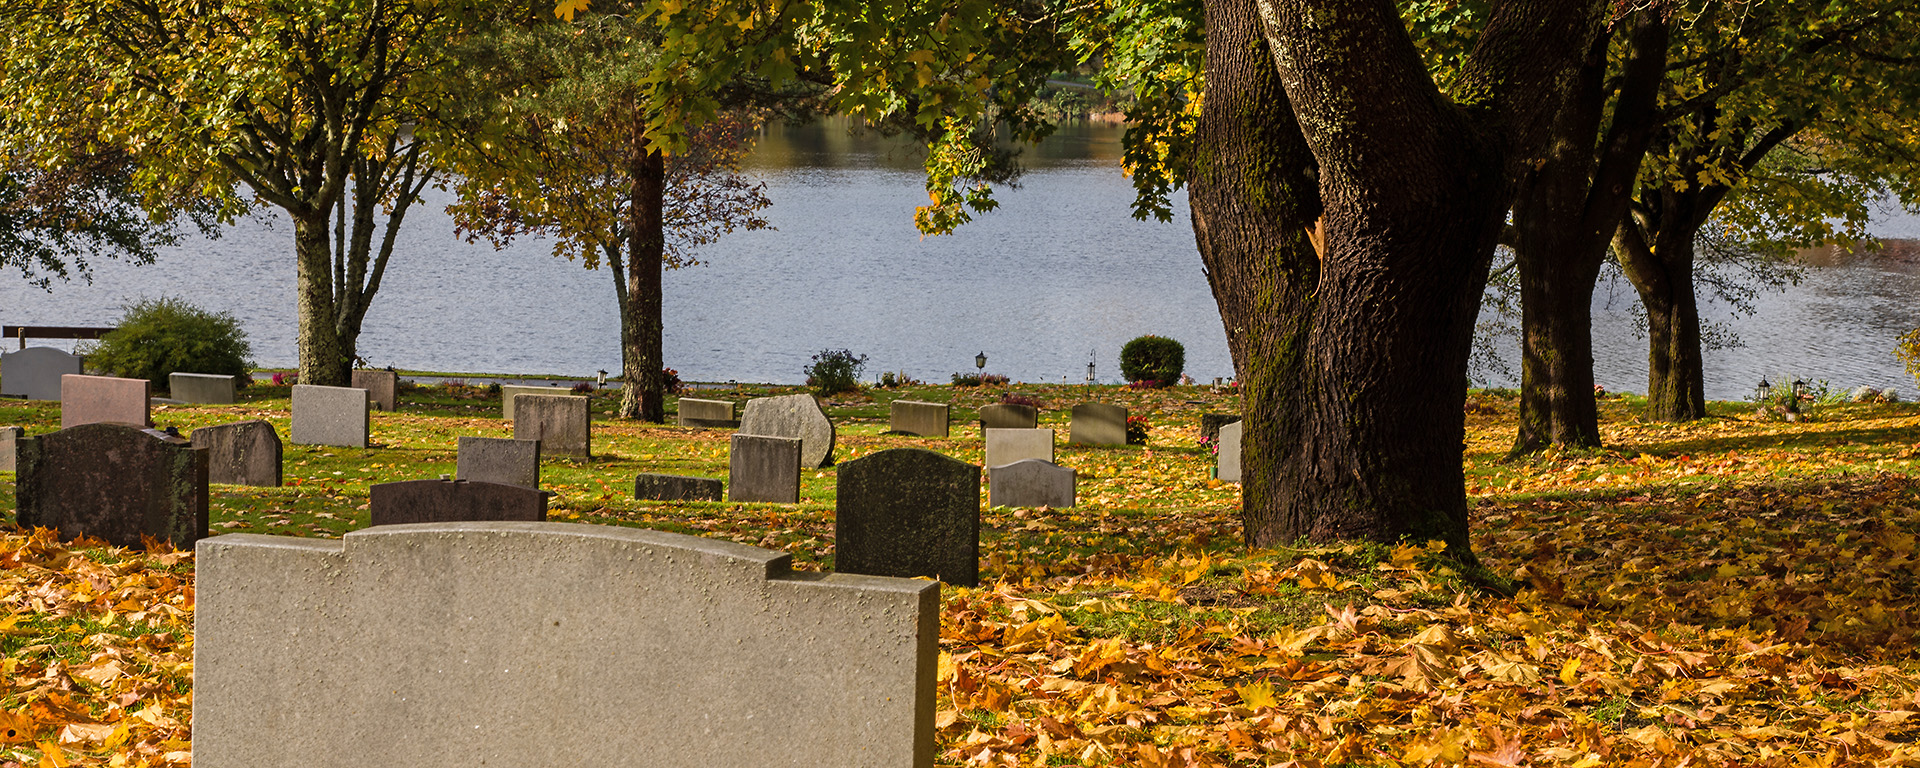 Grave stone in autumn overlooking a pond. 